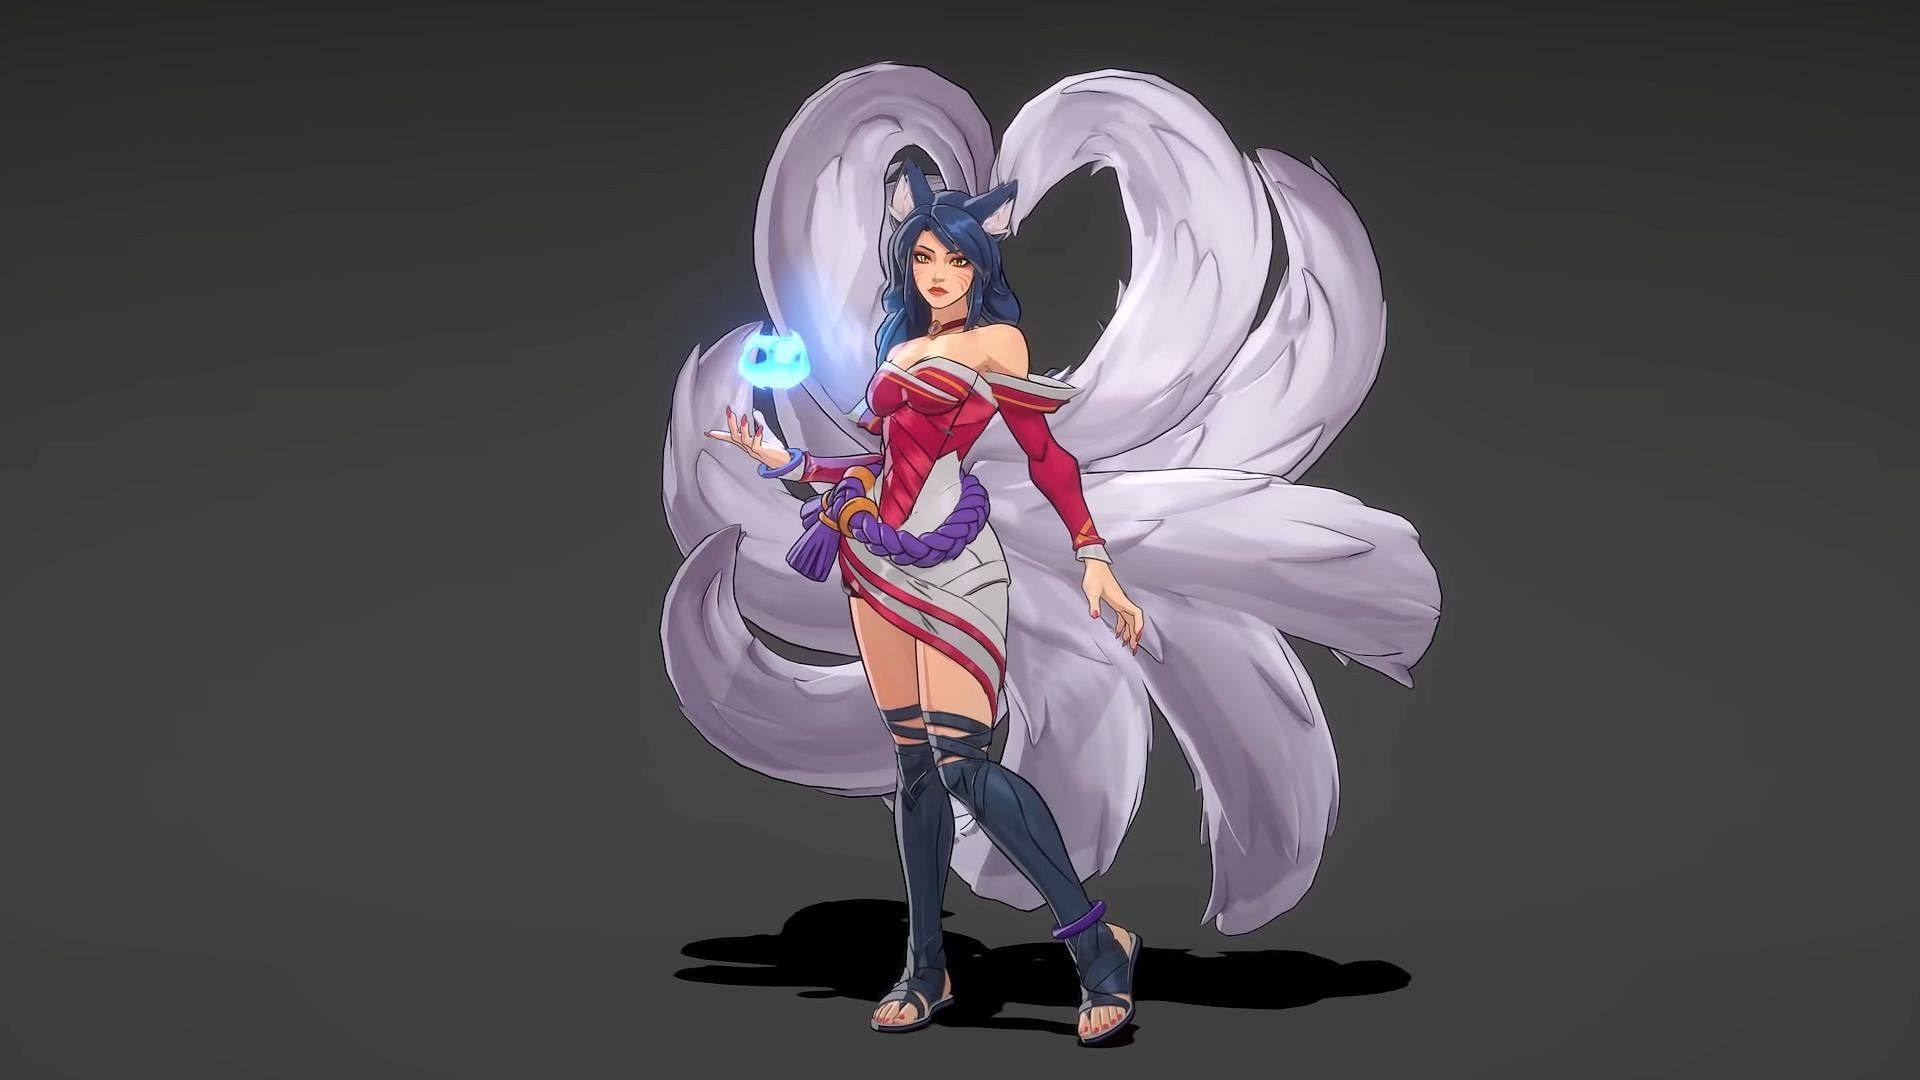 Five League of Legends characters we'd love to see in Project L